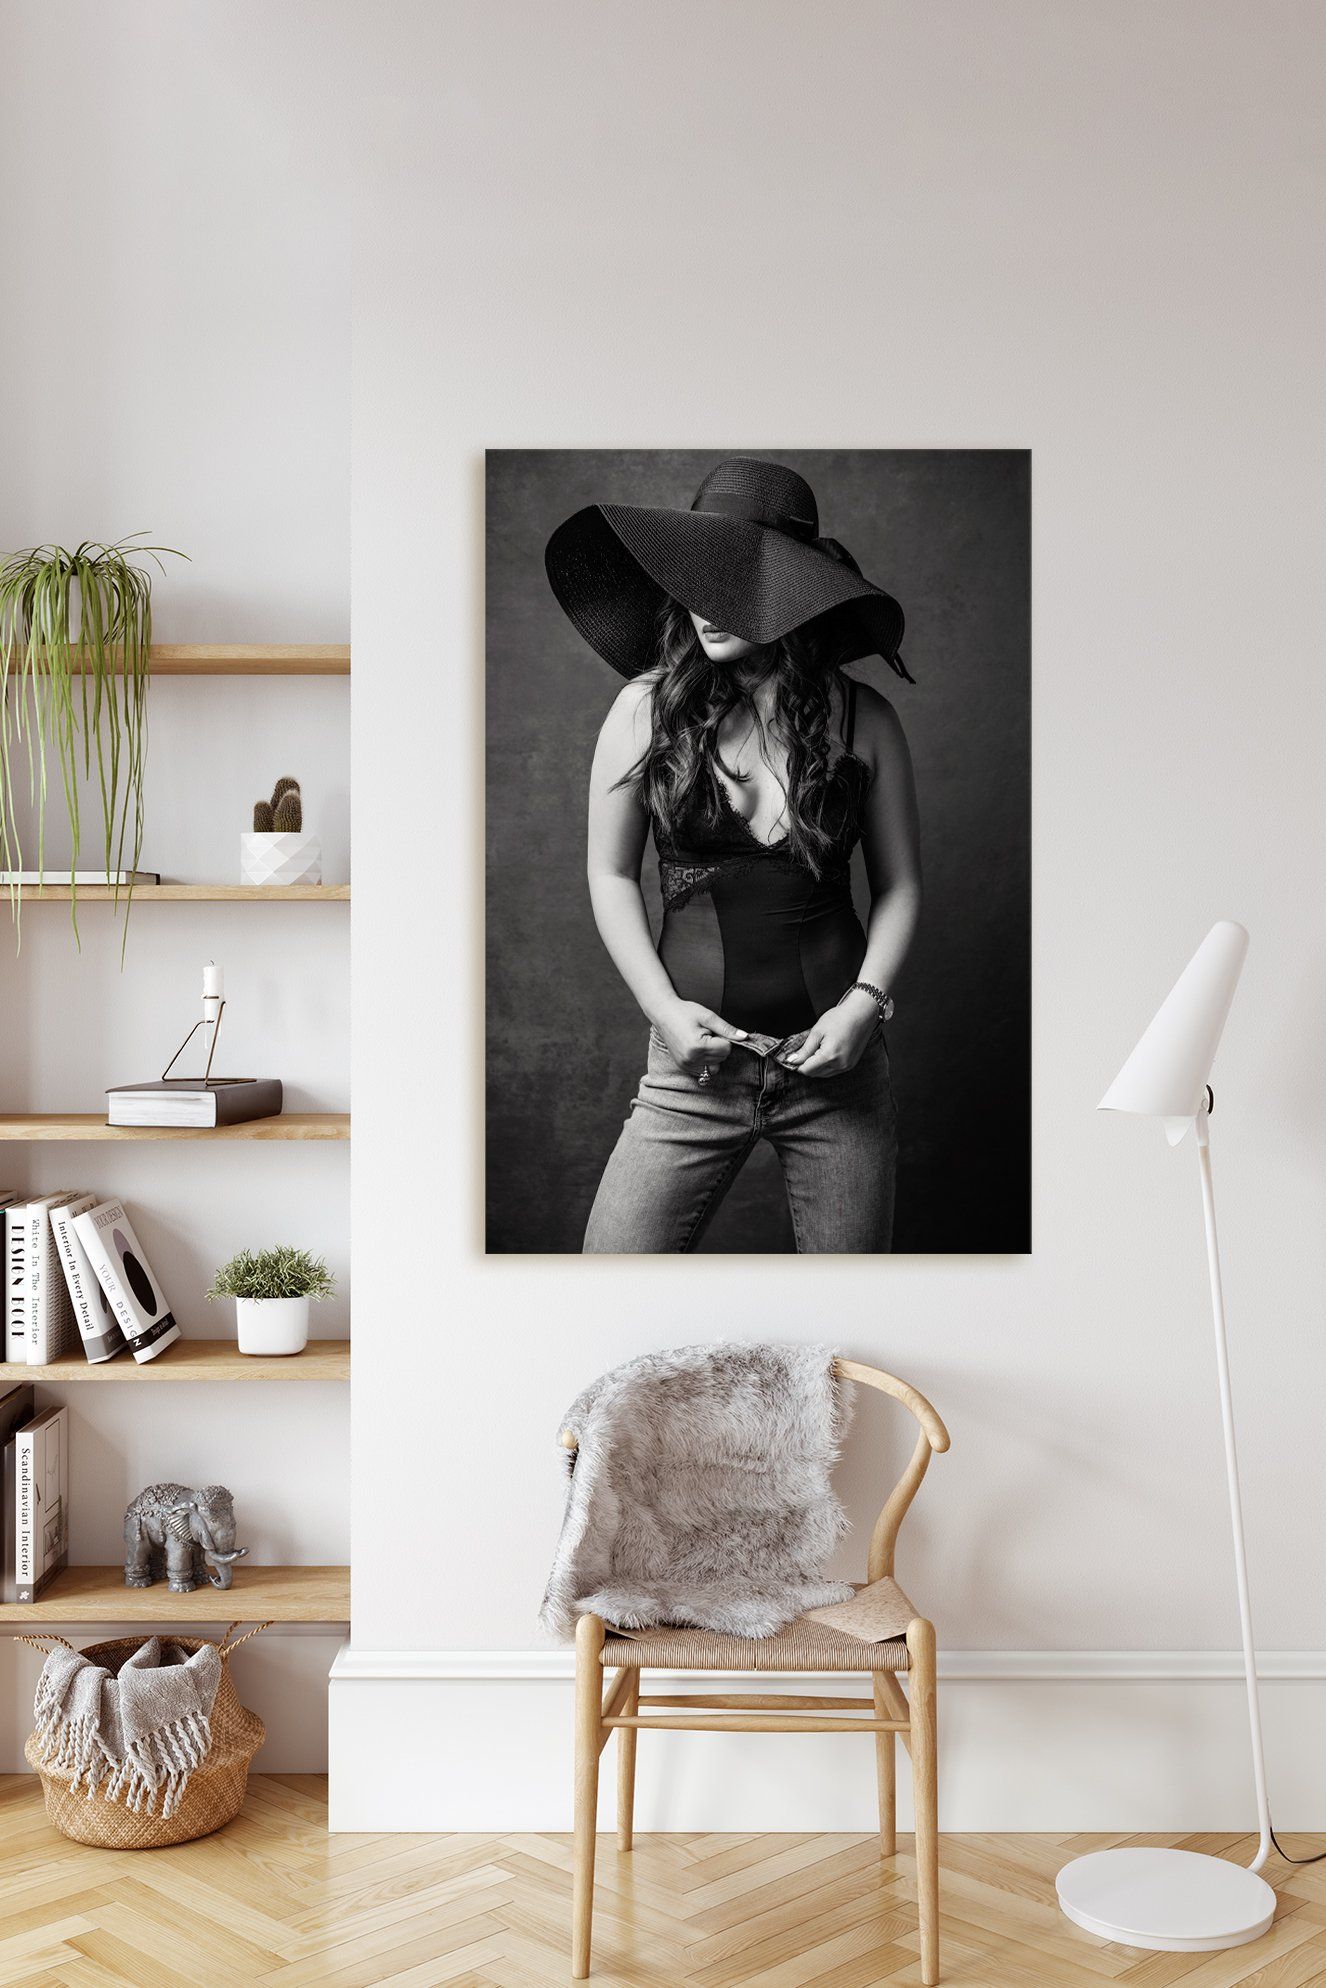 In a living room, a photo frame of a woman wearing a hat is hanging on the wall.